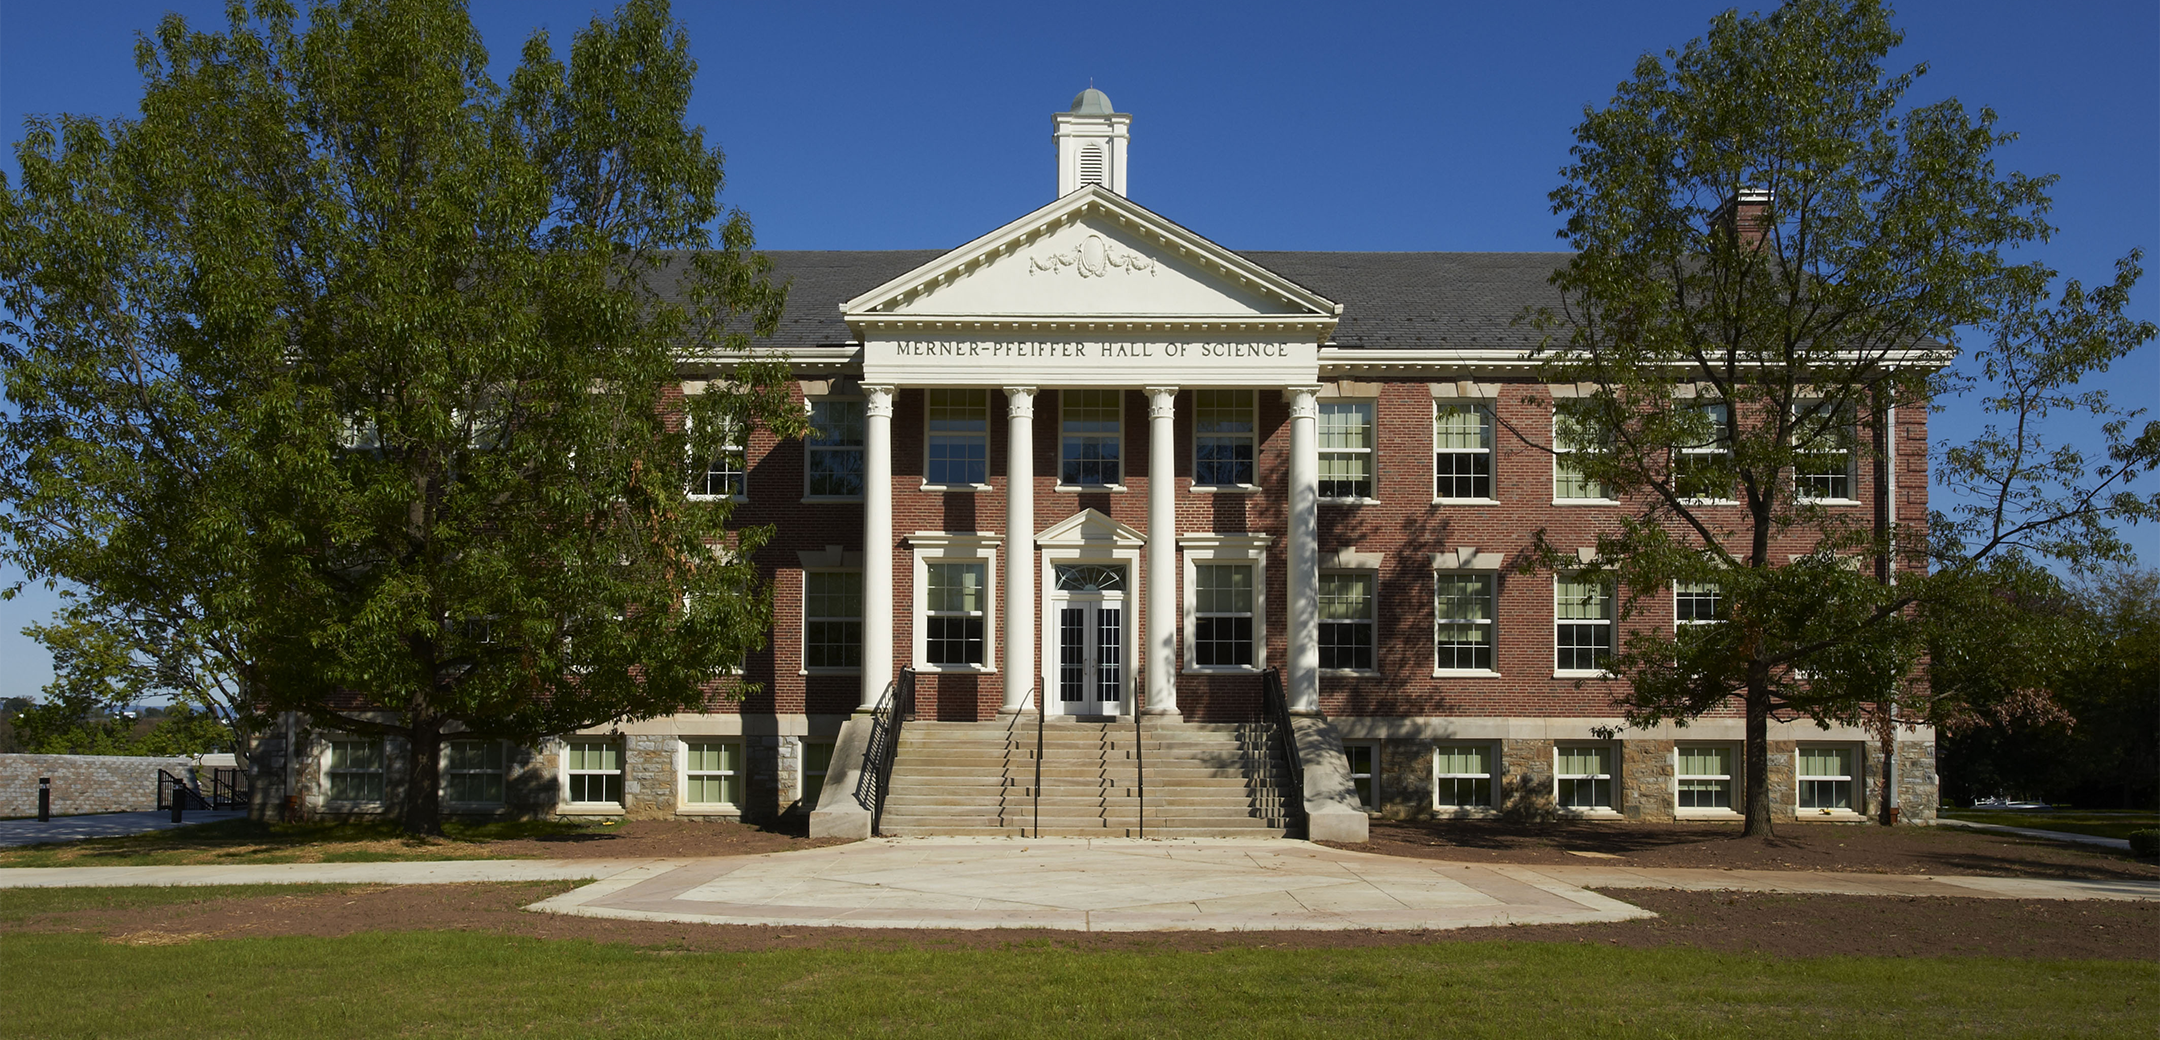 An exterior view of the Merner Pfeiffer Hall of Science building showcasing the front brick design, white columns, staircase leading up to the entrance and a front lawn in the foreground.